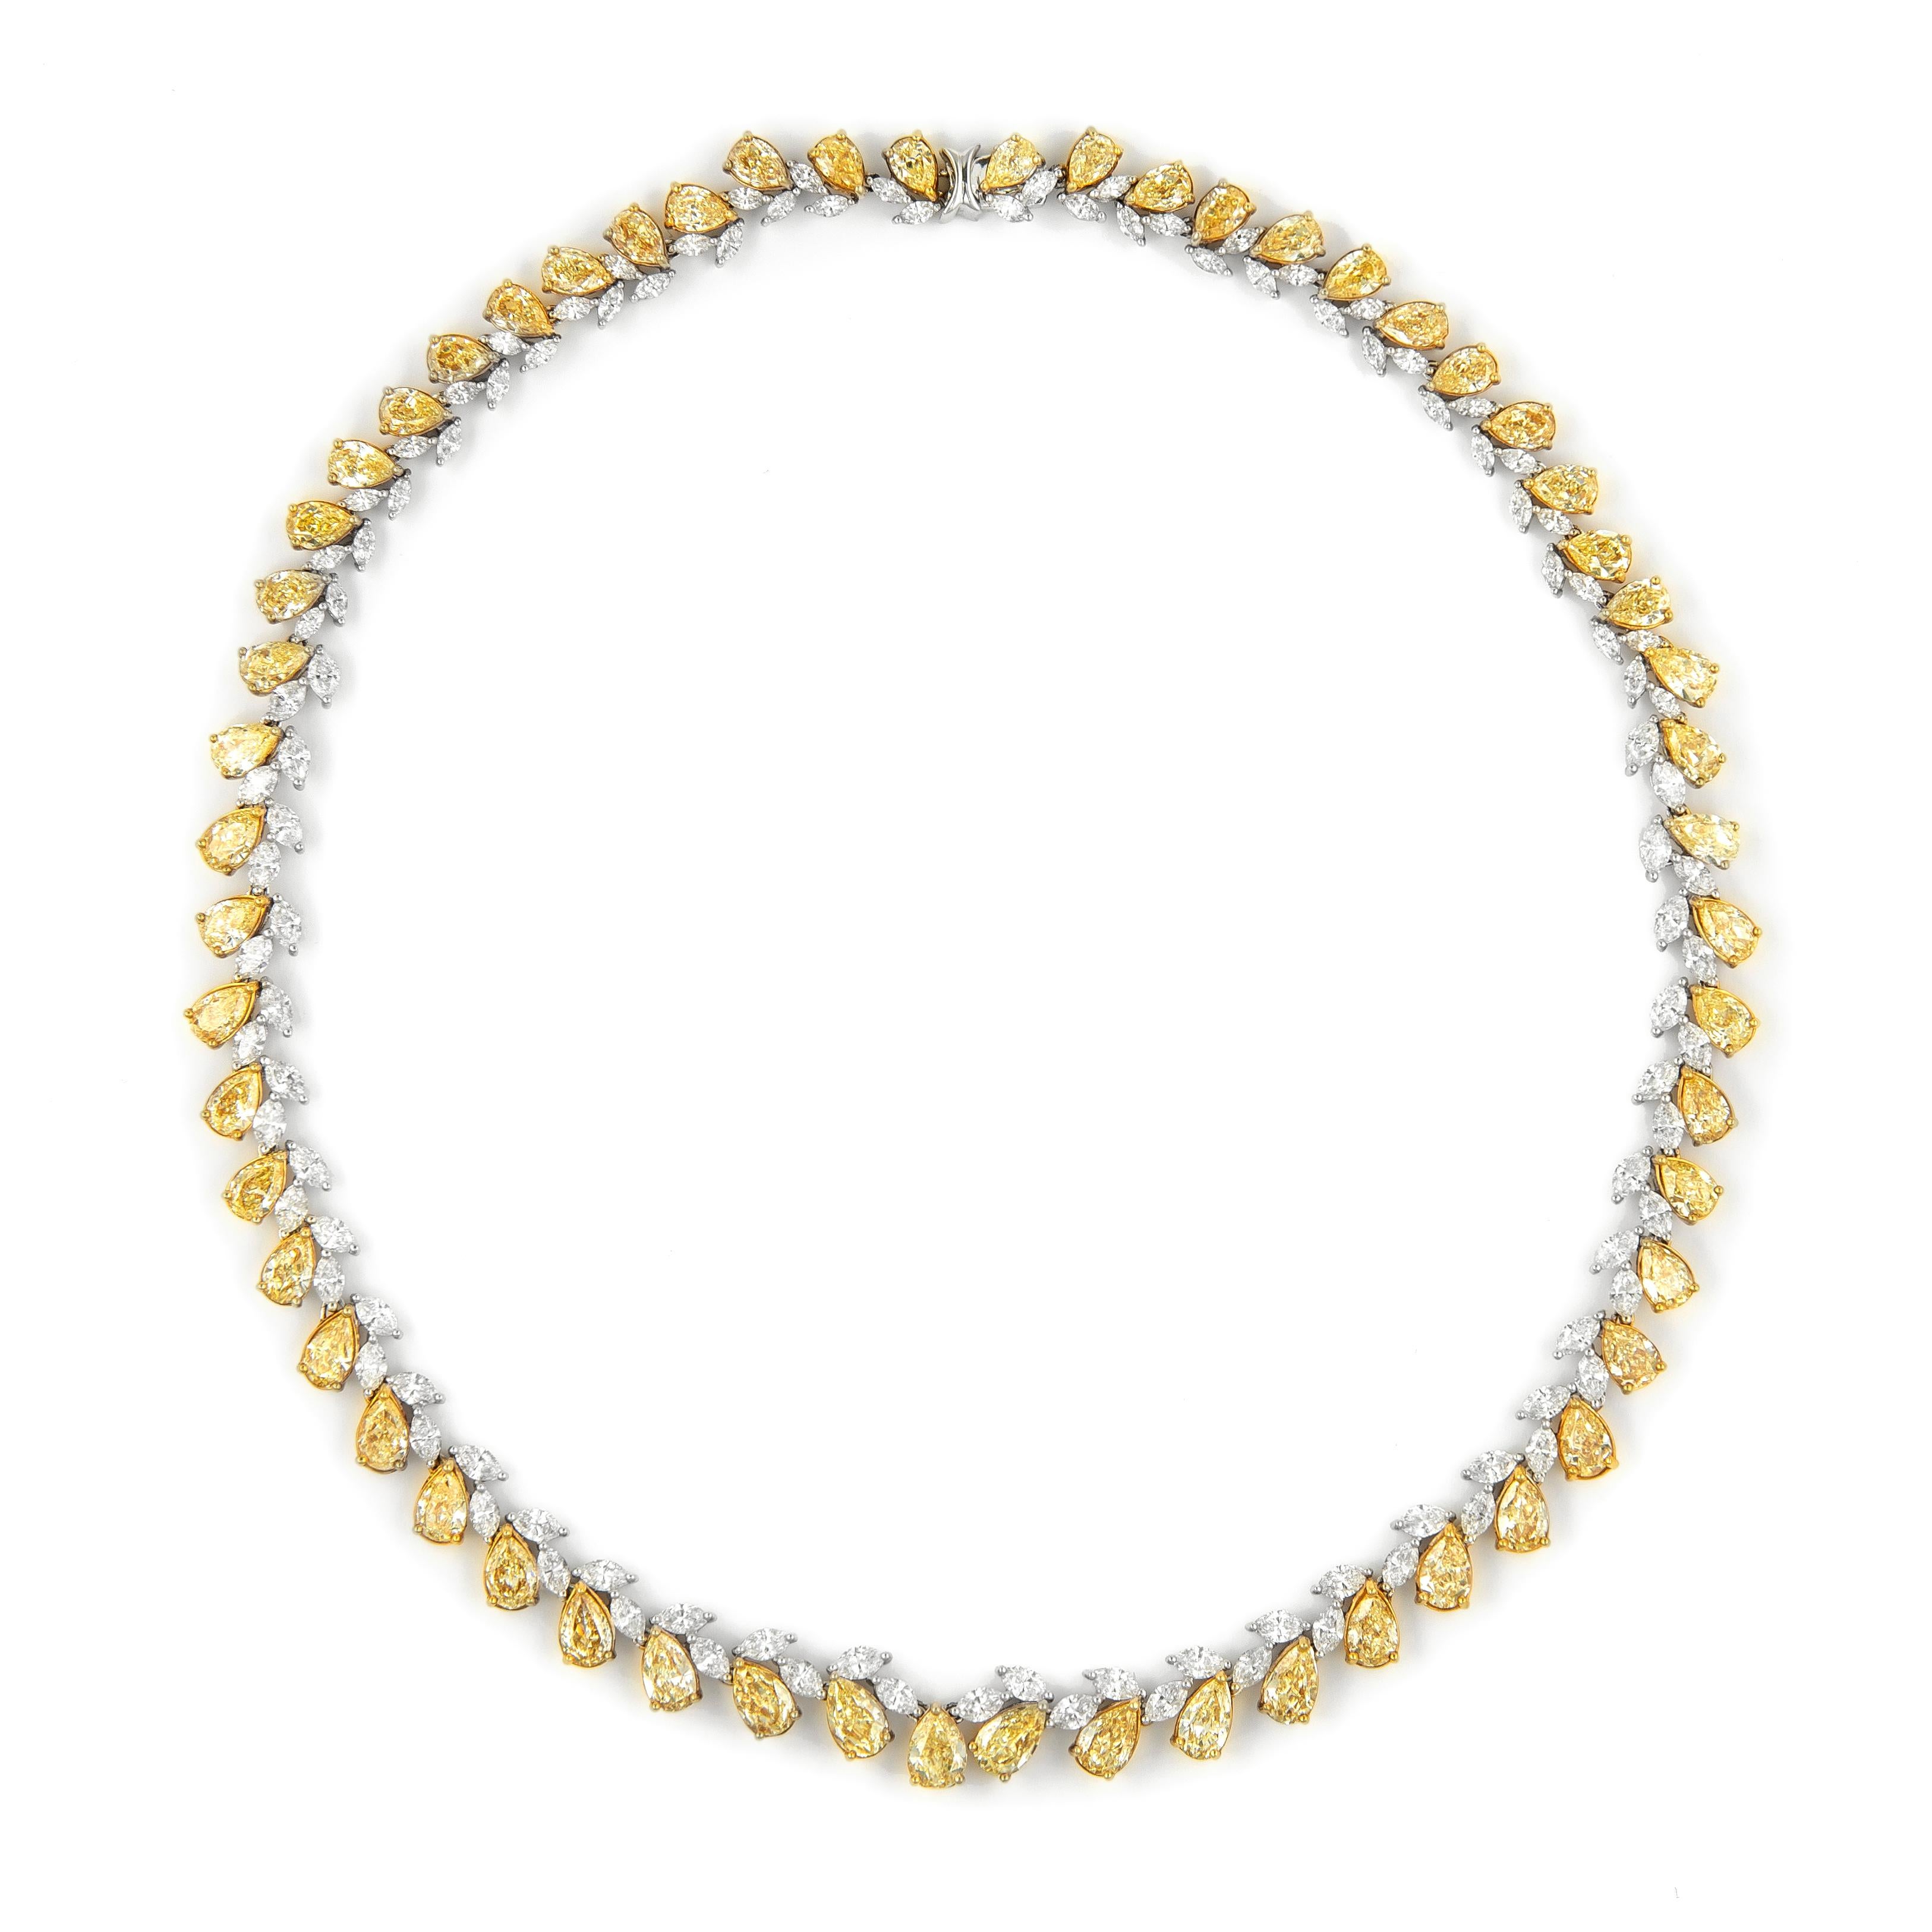 Contemporary Alexander 50.14 Yellow and White Diamond Necklace 18k White & YellowGold For Sale